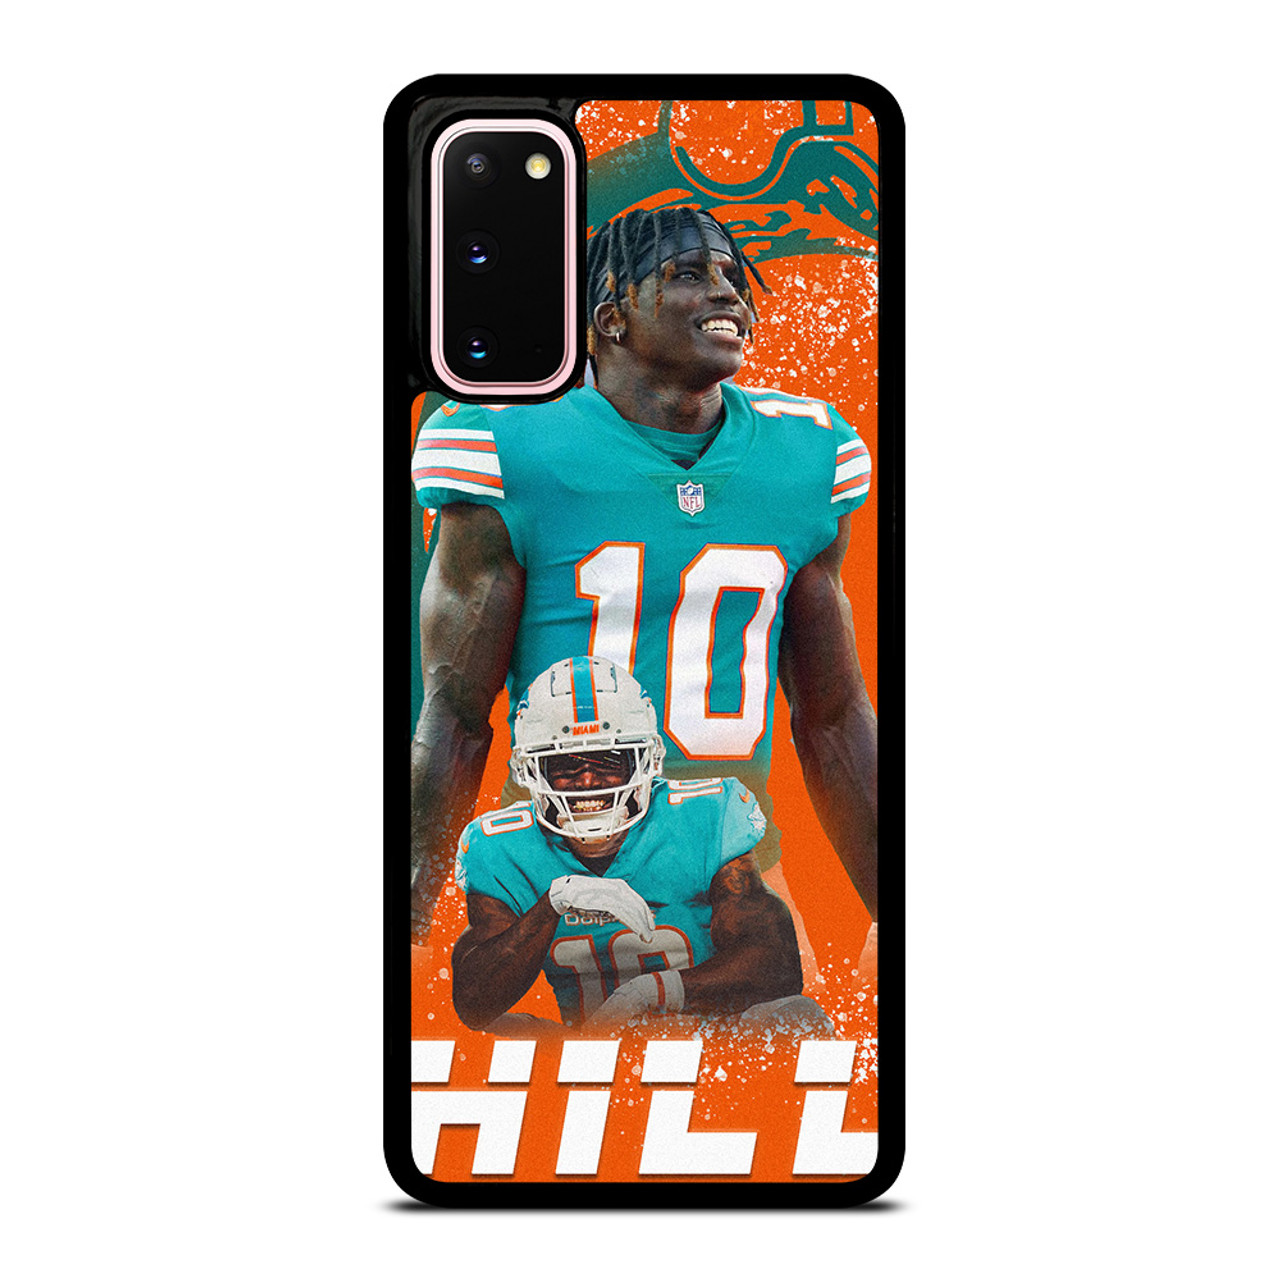 TYREEK HILL MIAMI DOLPHINS NFL Samsung Galaxy S20 Case Cover